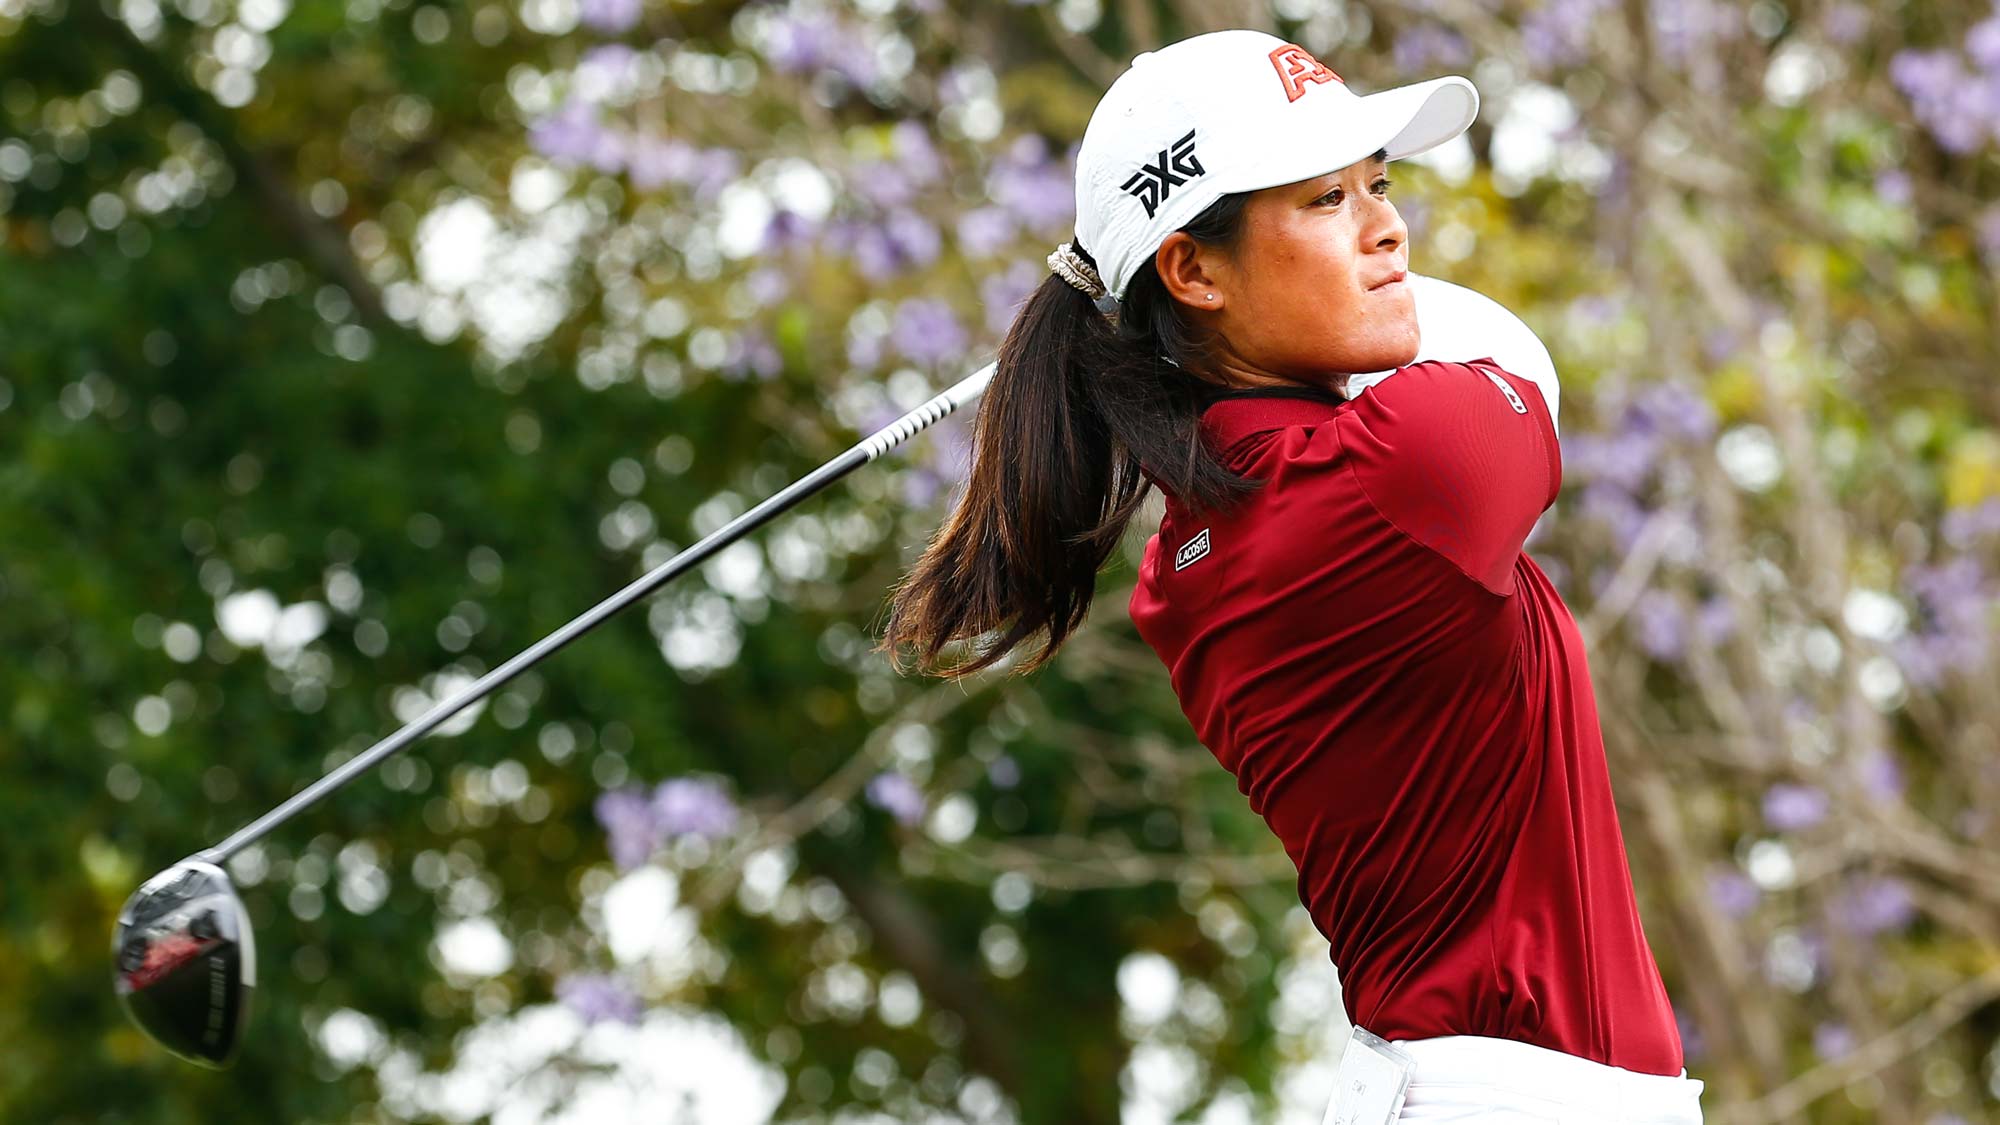 Celine Boutier of France tees off on the 1st hole during the final round of Honda LPGA Thailand